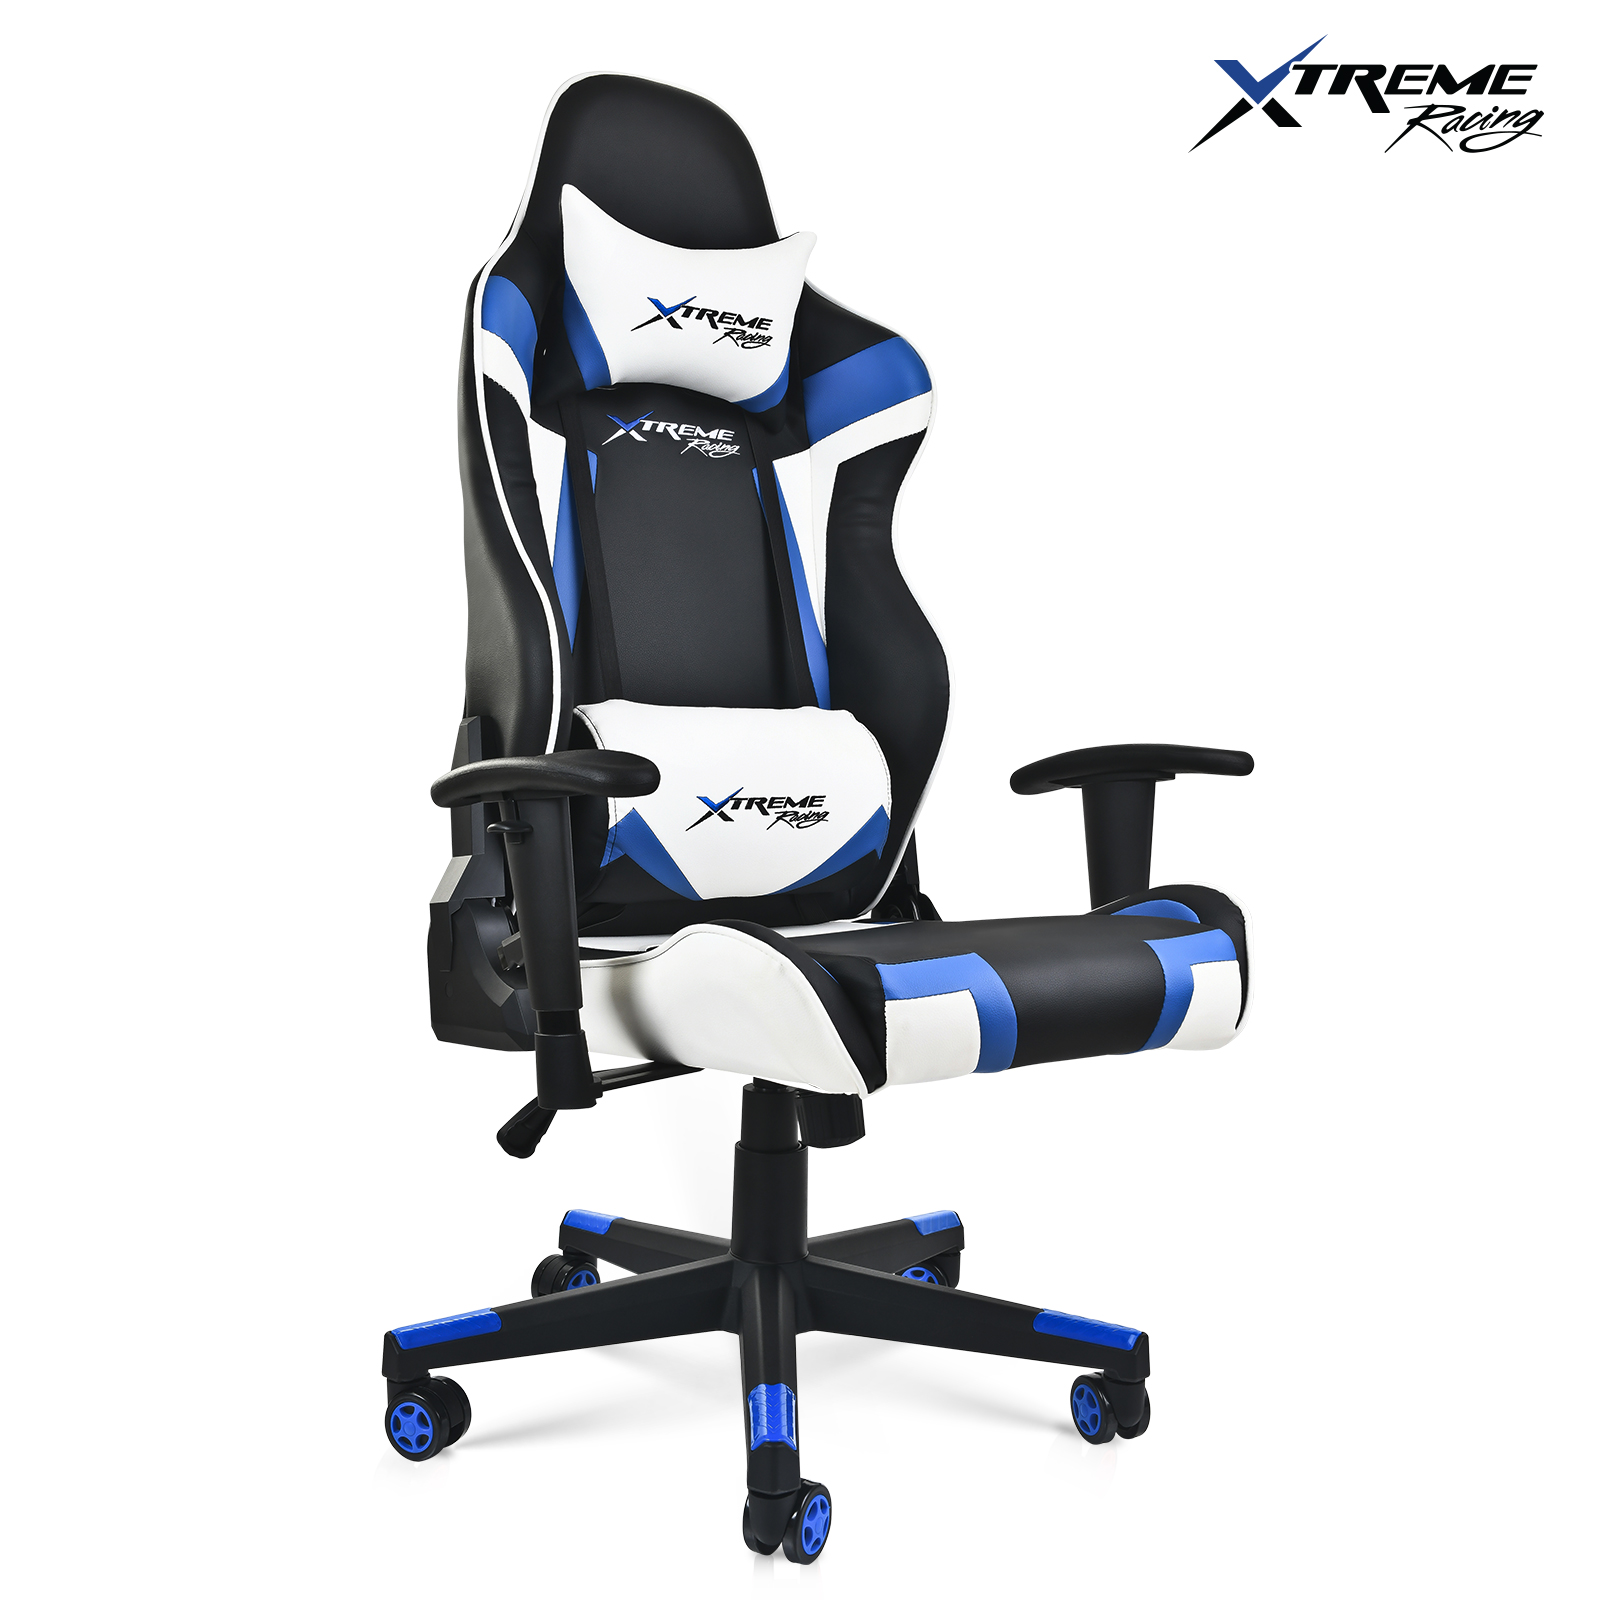 Xtreme Racing Ultimate Gaming Chair With Mouse Pad For Sale